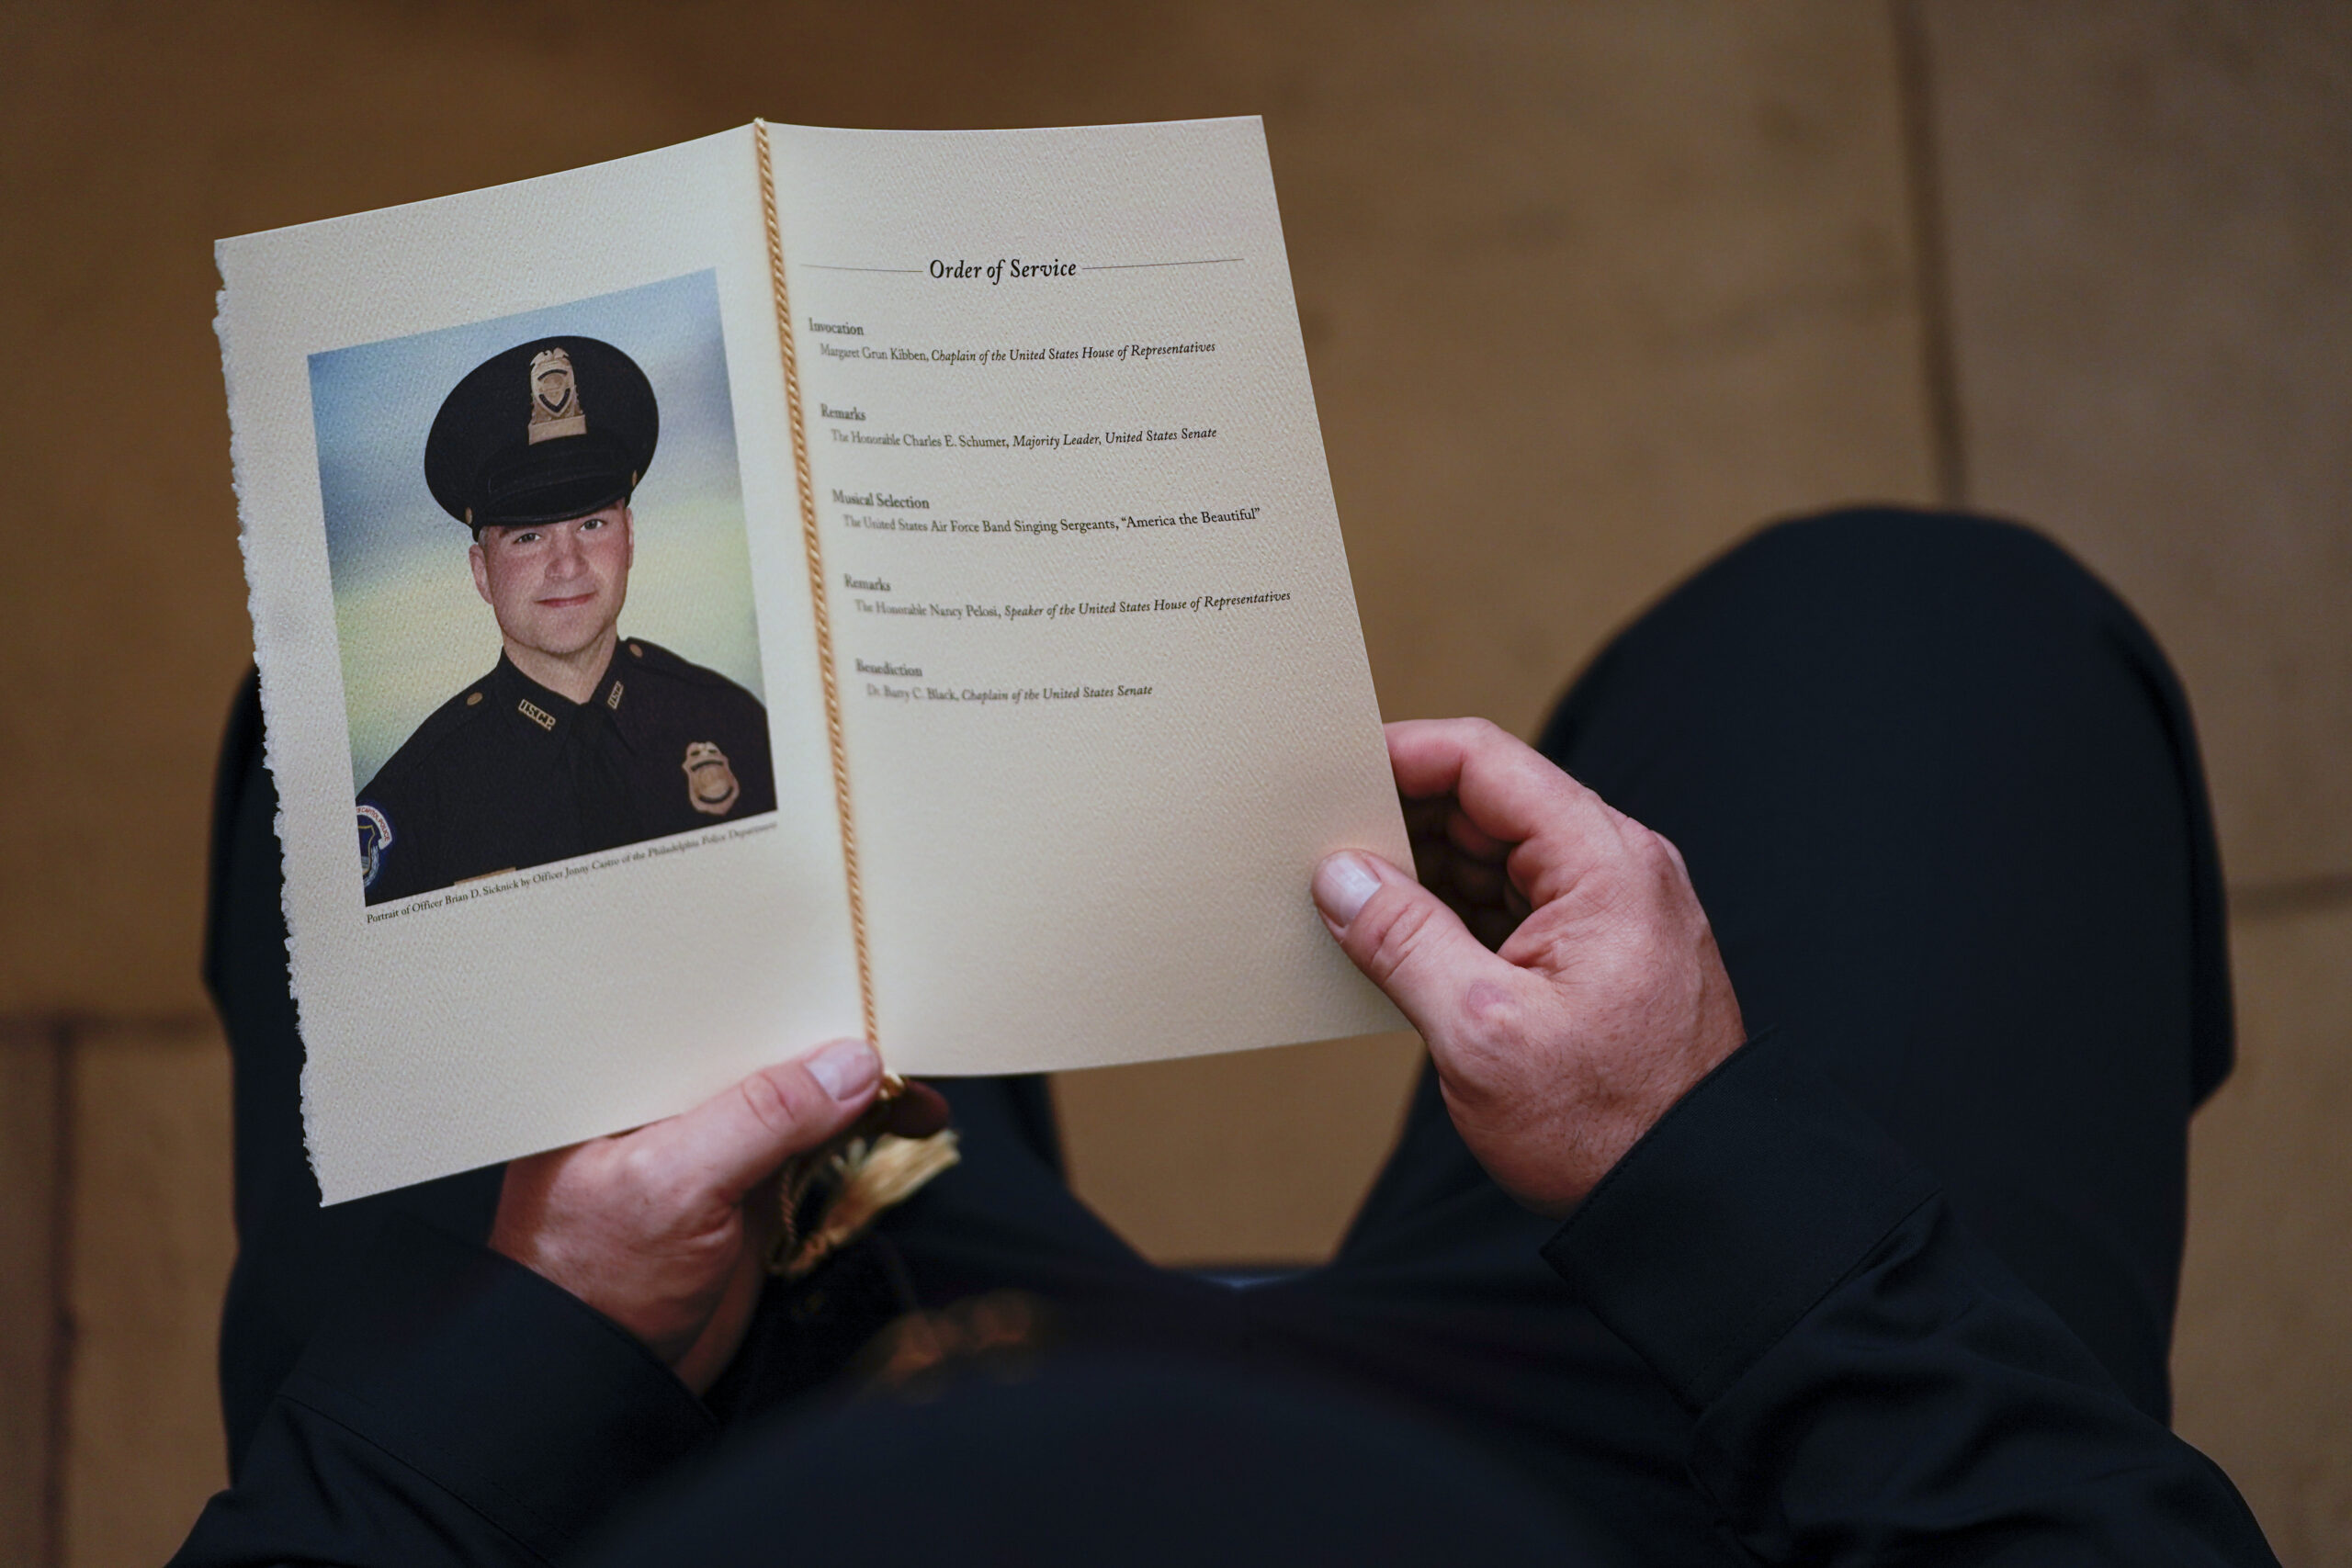 FILE - In this Feb. 3, 2021, file photo, a U.S. Capitol Police officer holds a program during a ceremony memorializing U.S. Capitol Police officer Brian Sicknick, as an urn with his cremated remains lies in honor on a black-draped table at the center of the Capitol Rotunda in Washington. The D.C. medical examiner’s office says Sicknick, who was injured during the Jan. 6 insurrection, suffered a stroke and ruled the officer died from natural causes. (Demetrius Freeman/The Washington Post via AP, Pool)